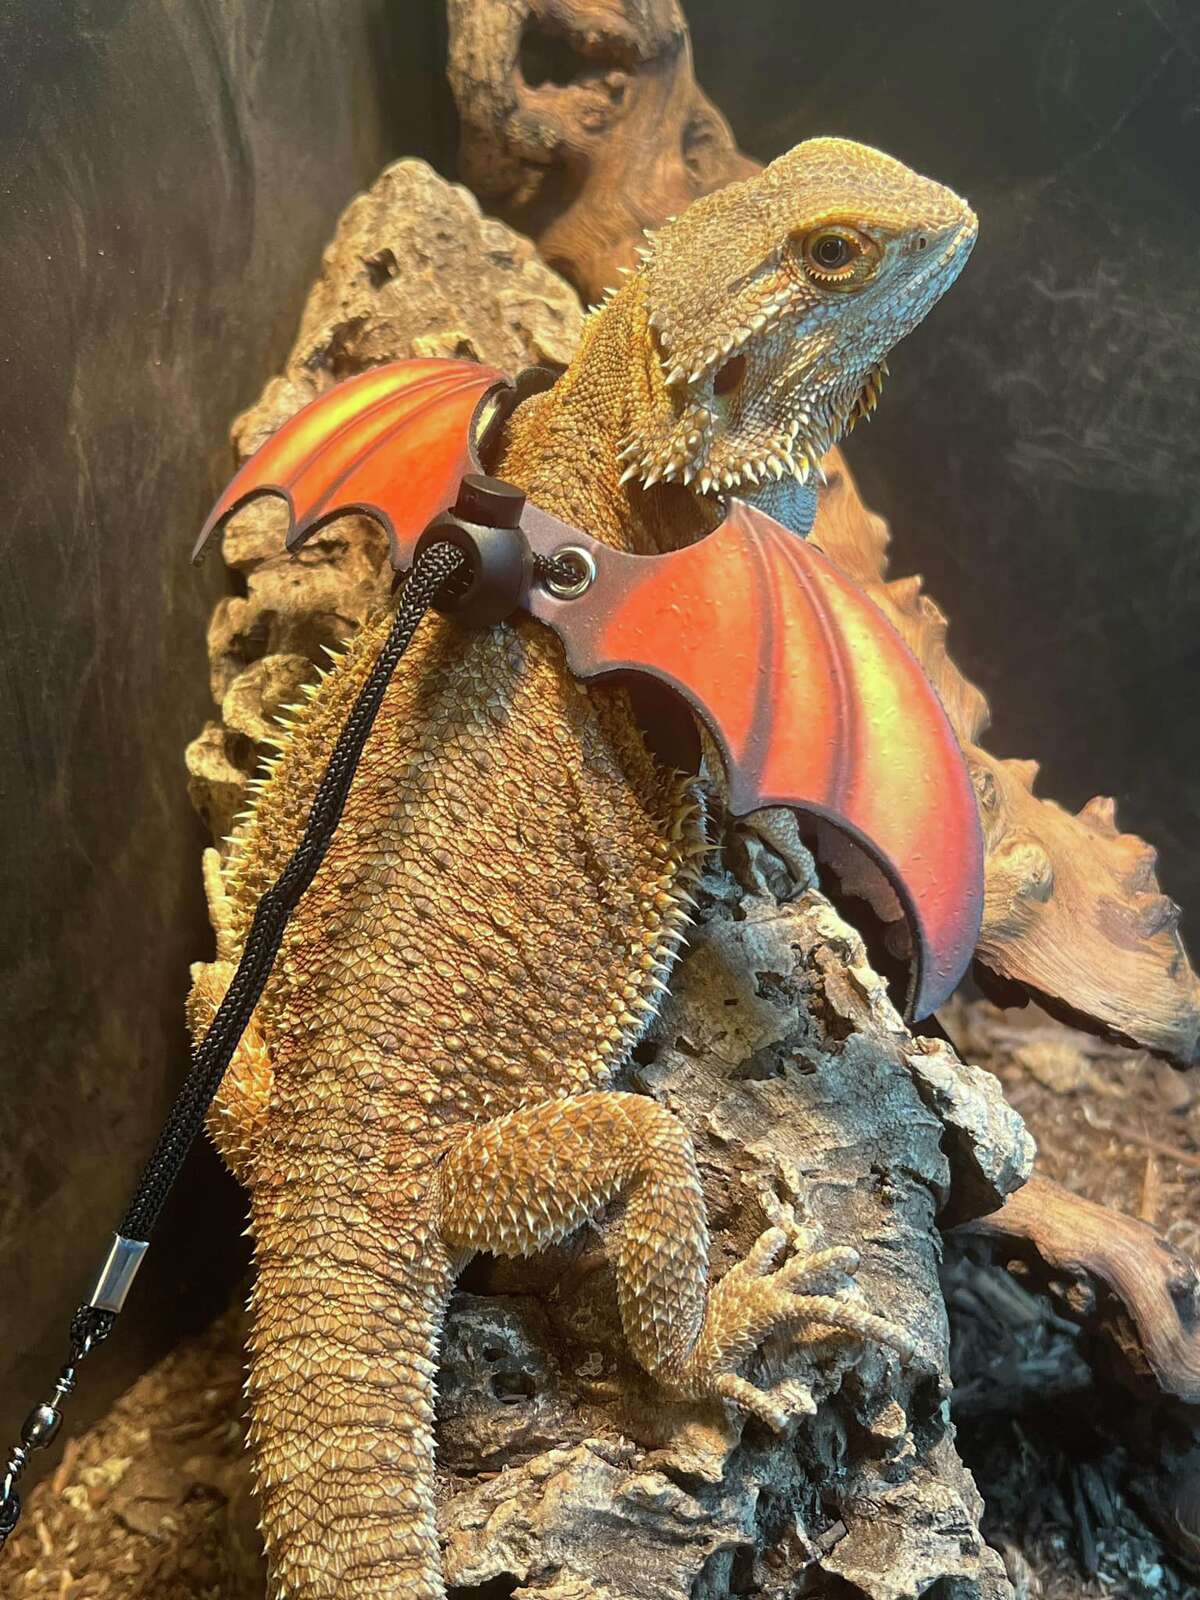 Bearded dragon Hestia may not be a "real" dragon but she dresses the part for Pearland's Animal Services Halloween costume contest.